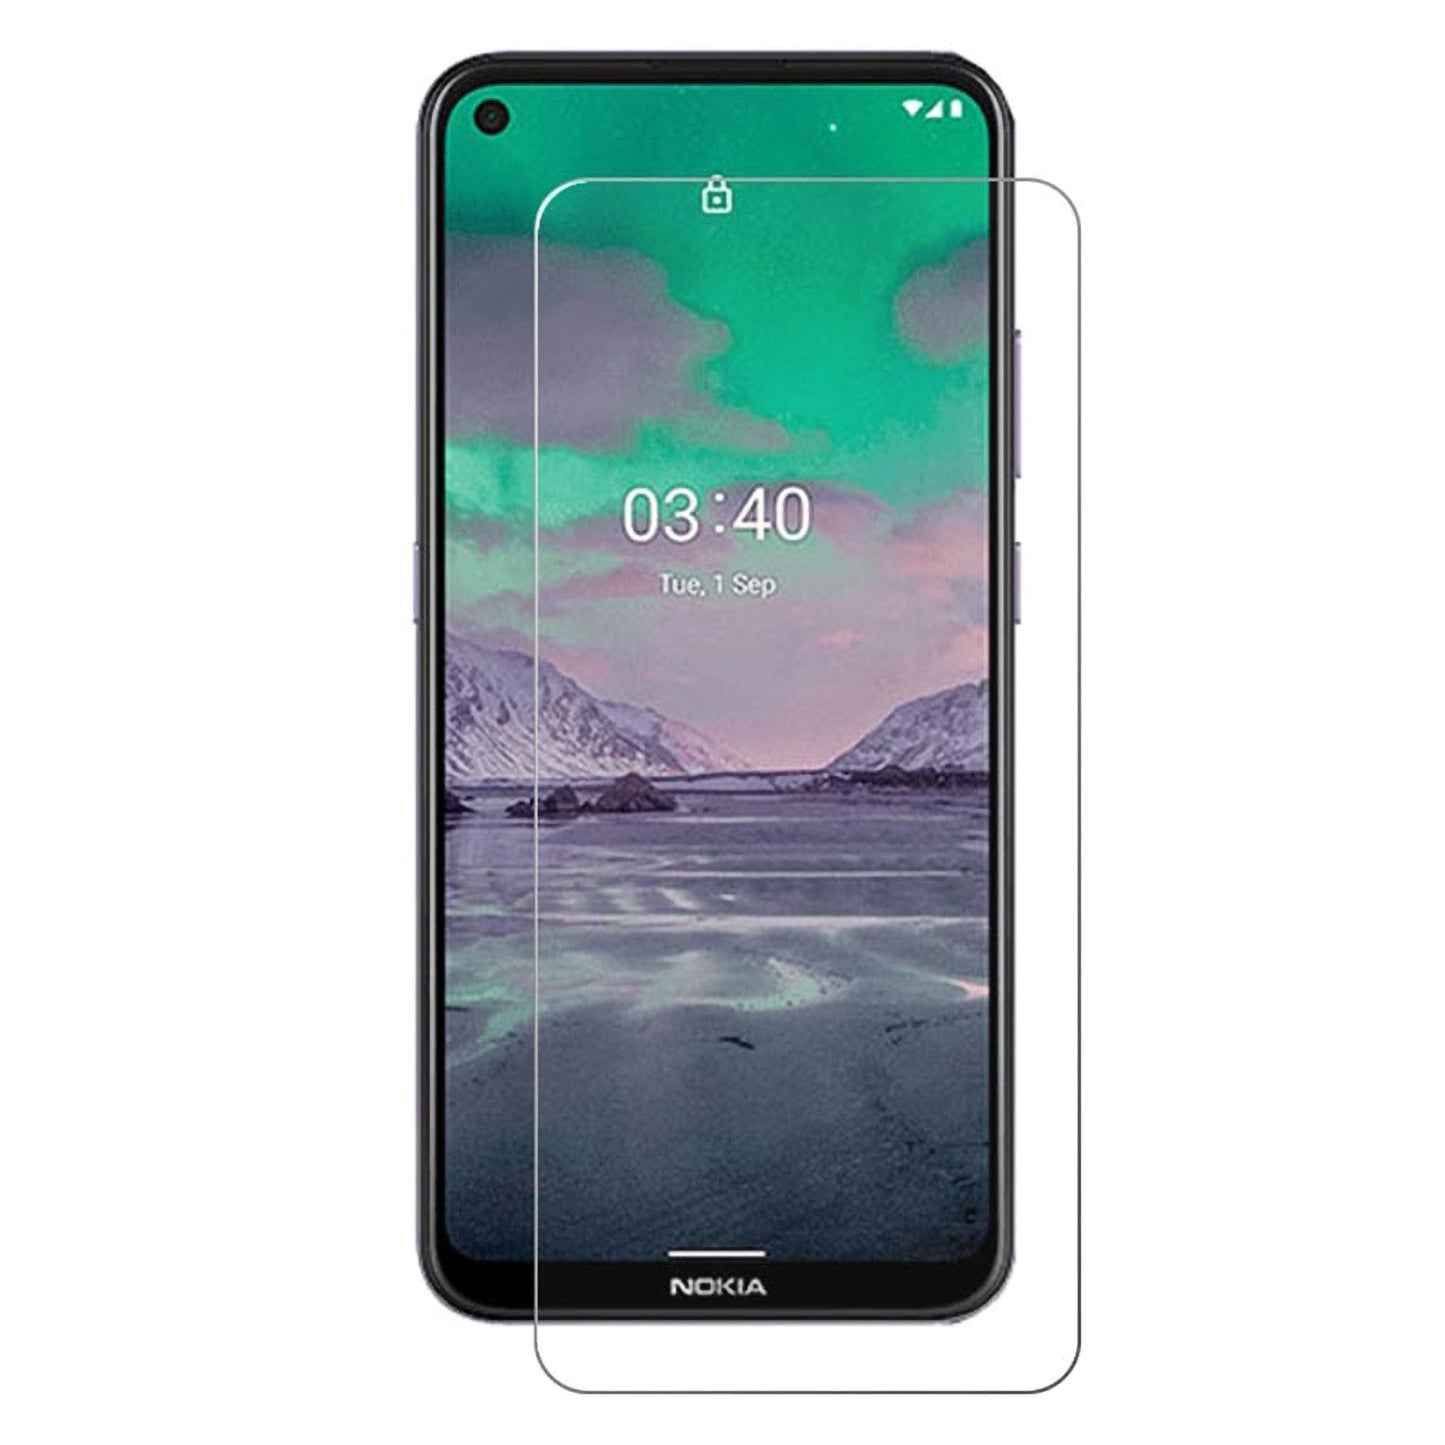 [2 Pack] MEZON Nokia 5.4 Tempered Glass Crystal Clear Premium 9H HD Case Friendly Screen Protector (Nokia 5.4, 9H)